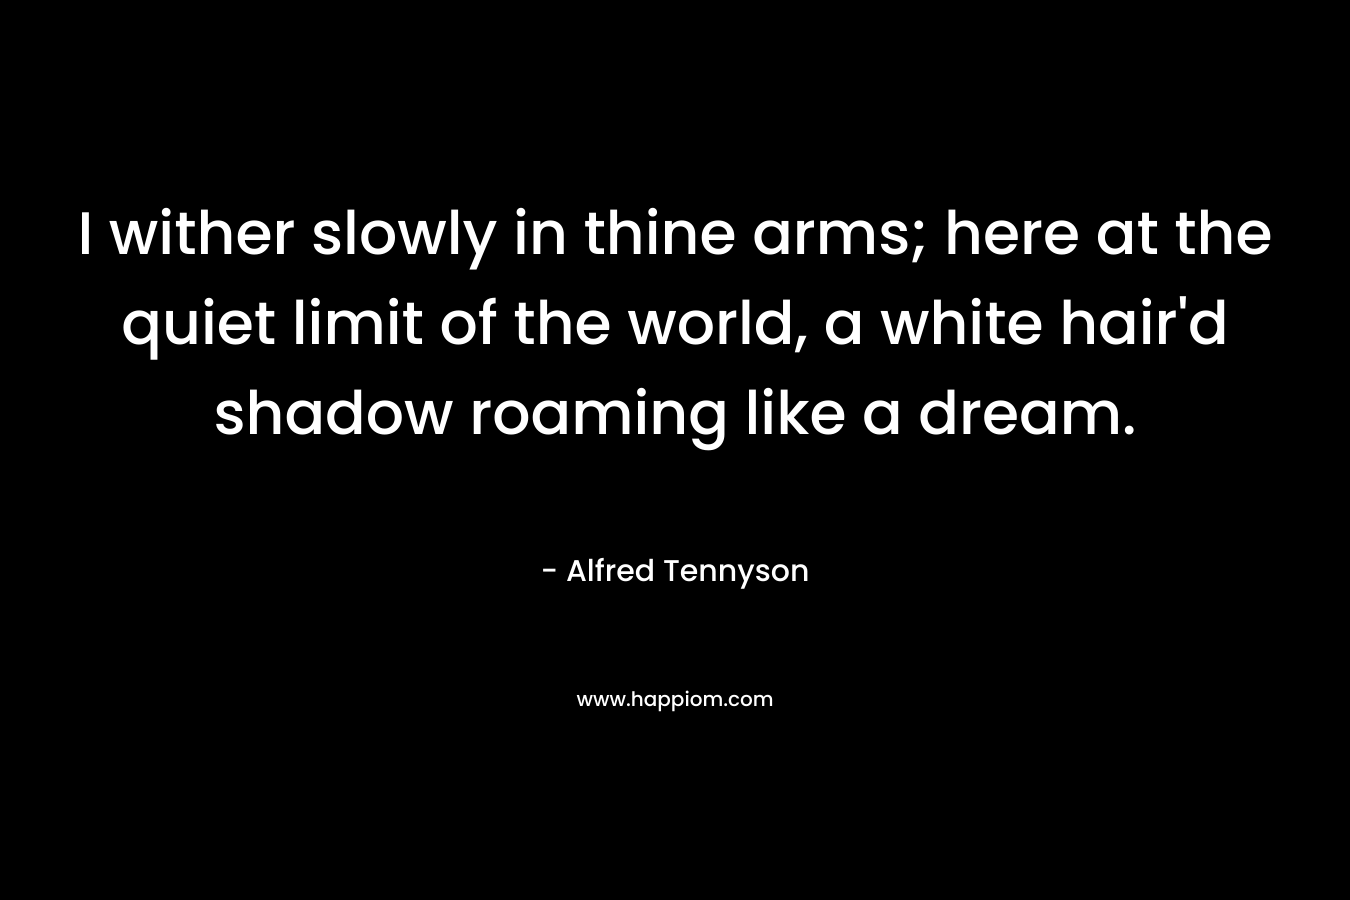 I wither slowly in thine arms; here at the quiet limit of the world, a white hair'd shadow roaming like a dream.